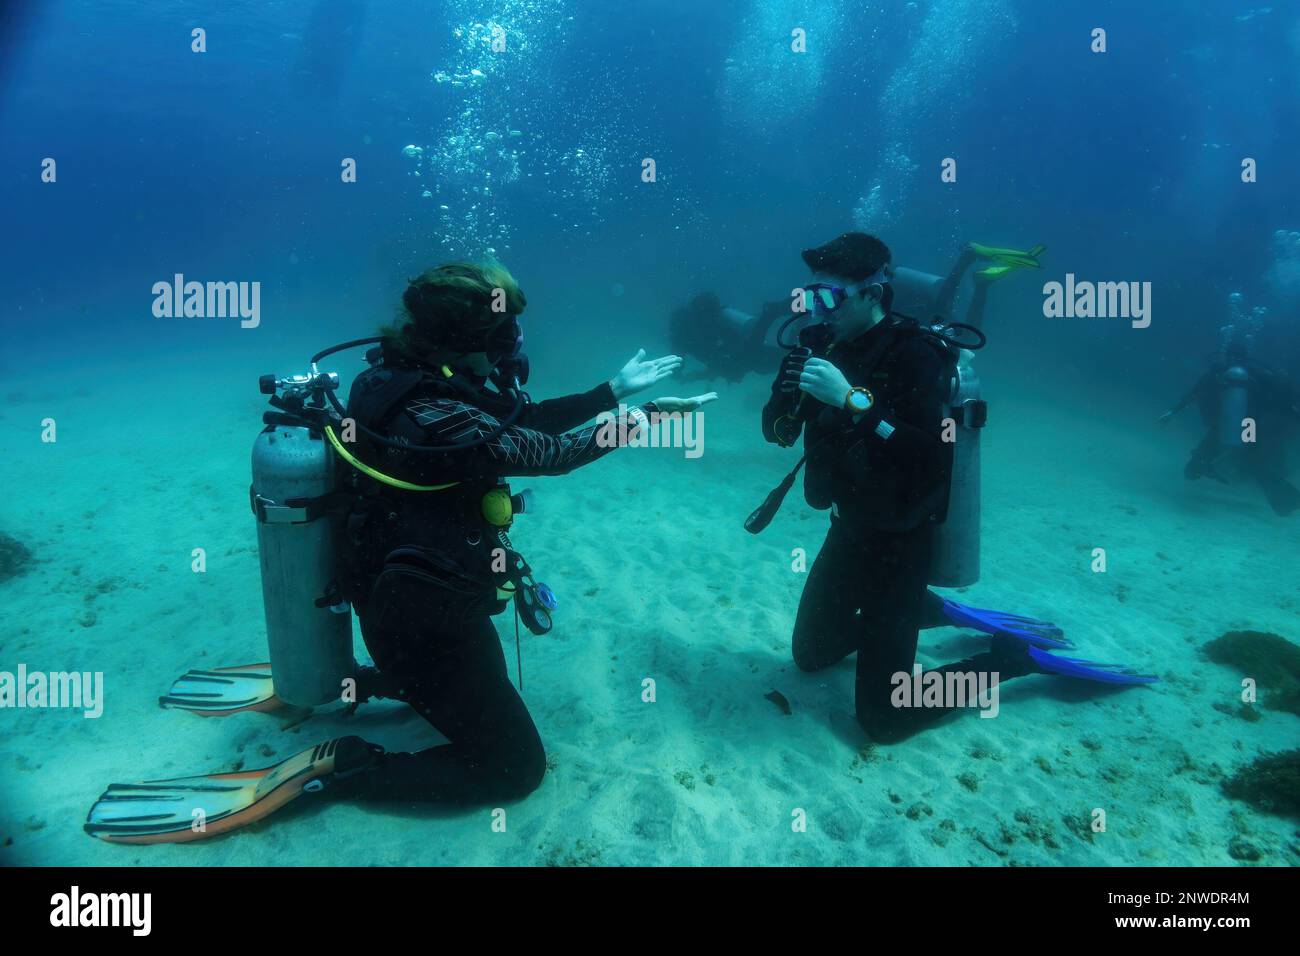 Underwater Scuba dive course training. Unidentified dive master explains with gestures what has to be done during the underwater dive lesson. Bali Stock Photo